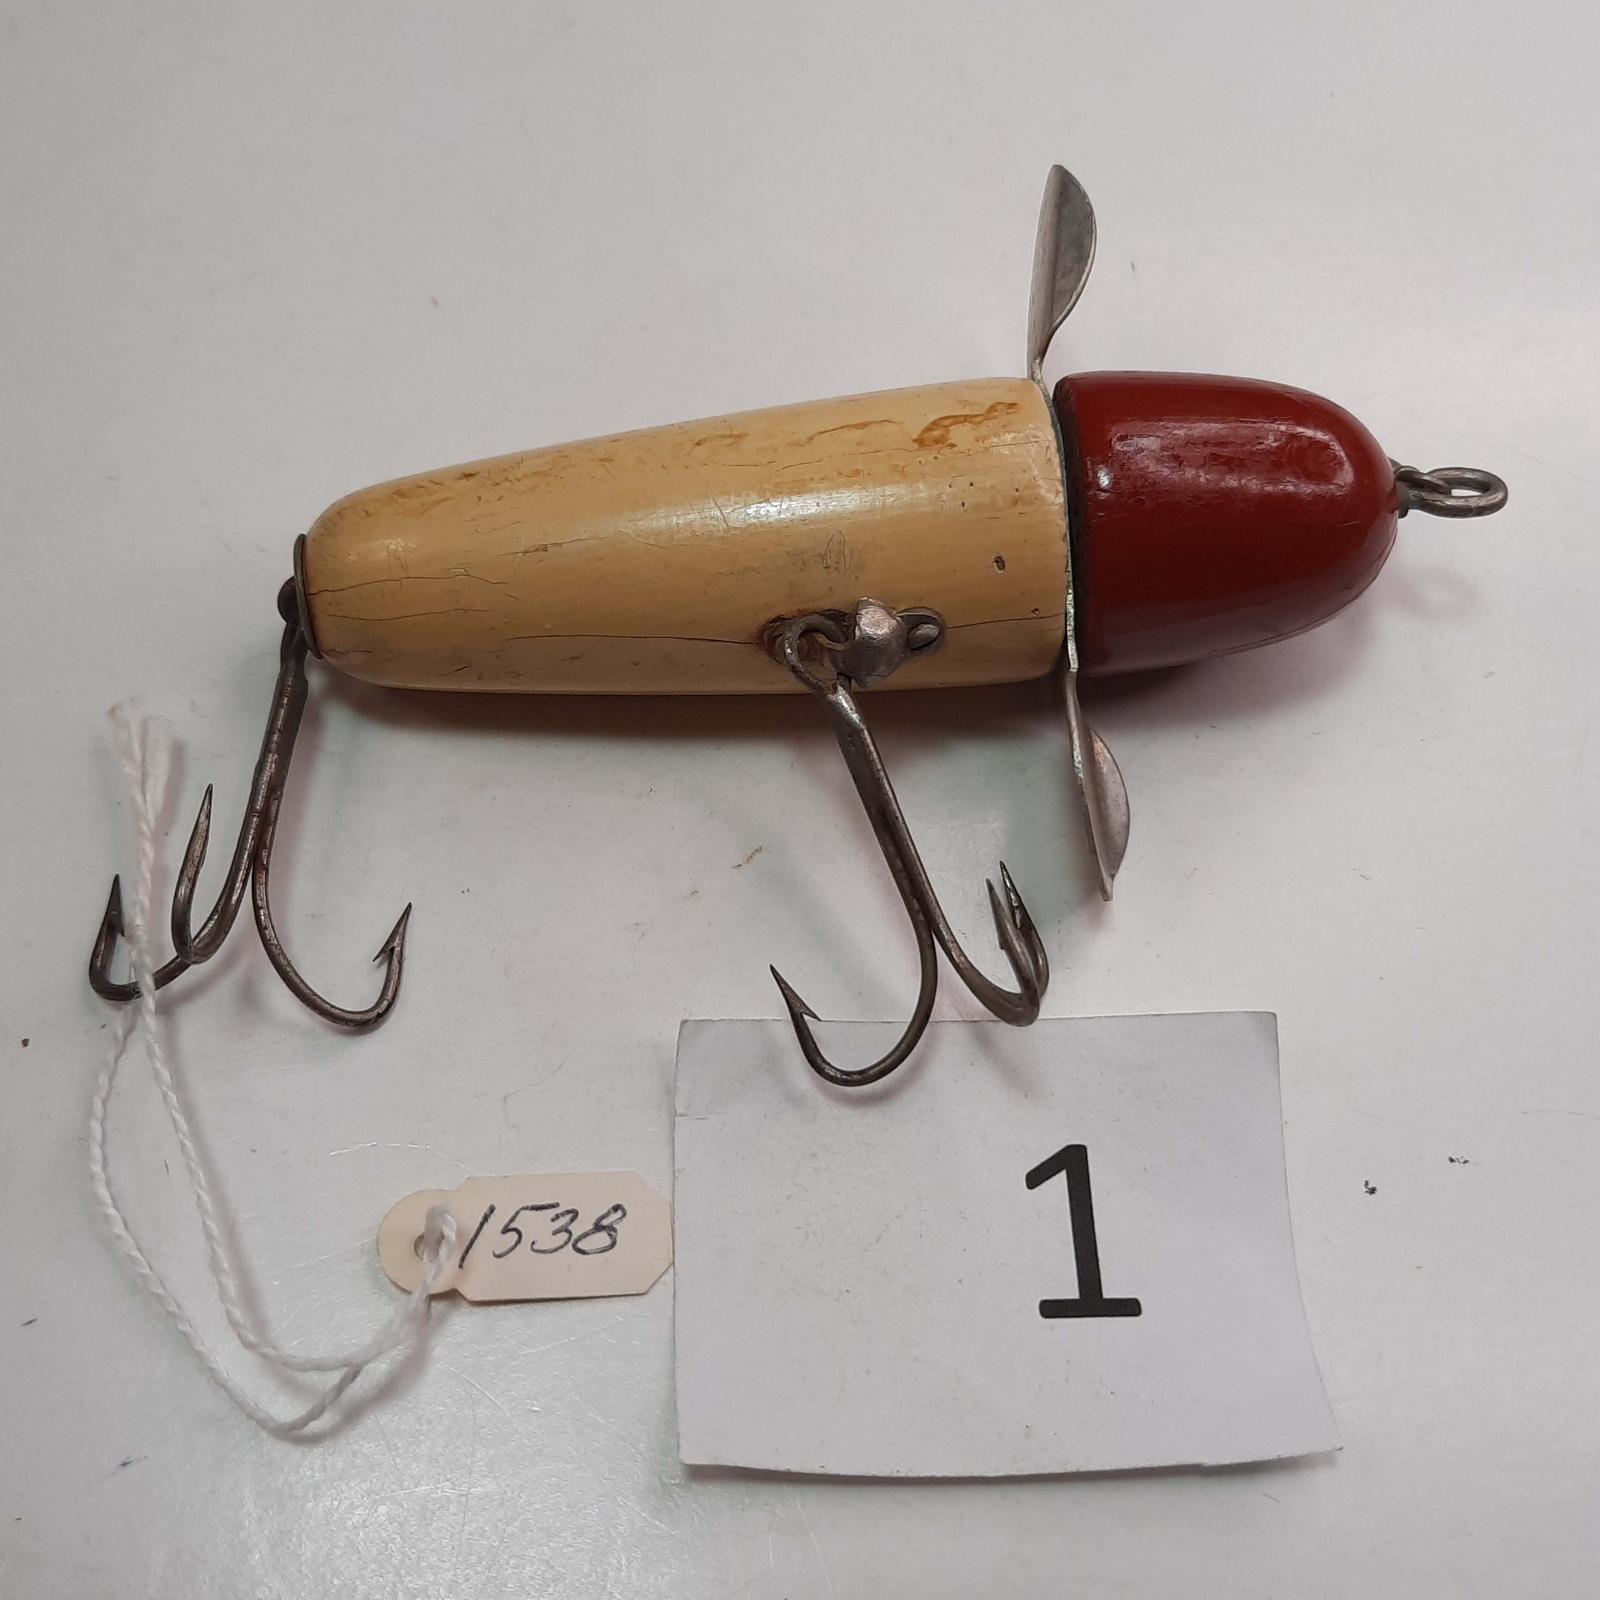 Pflueger Globe Value Old Antique Fishing Lures, Tackle and Value